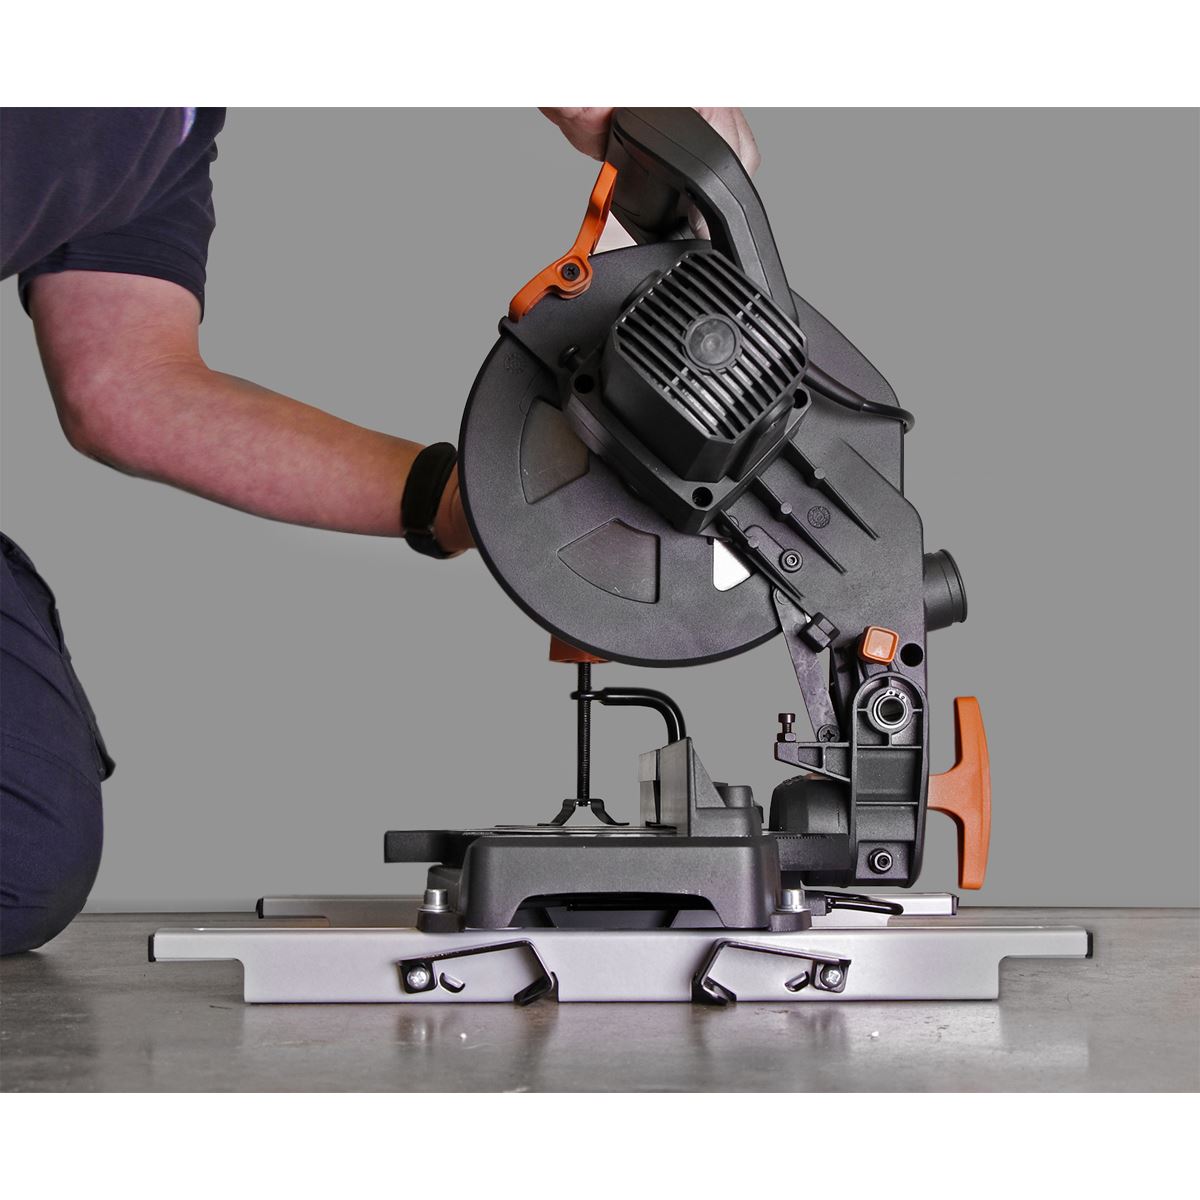 Benchclaw™ Fit to Power Tools and Easily Mount on Workbenches